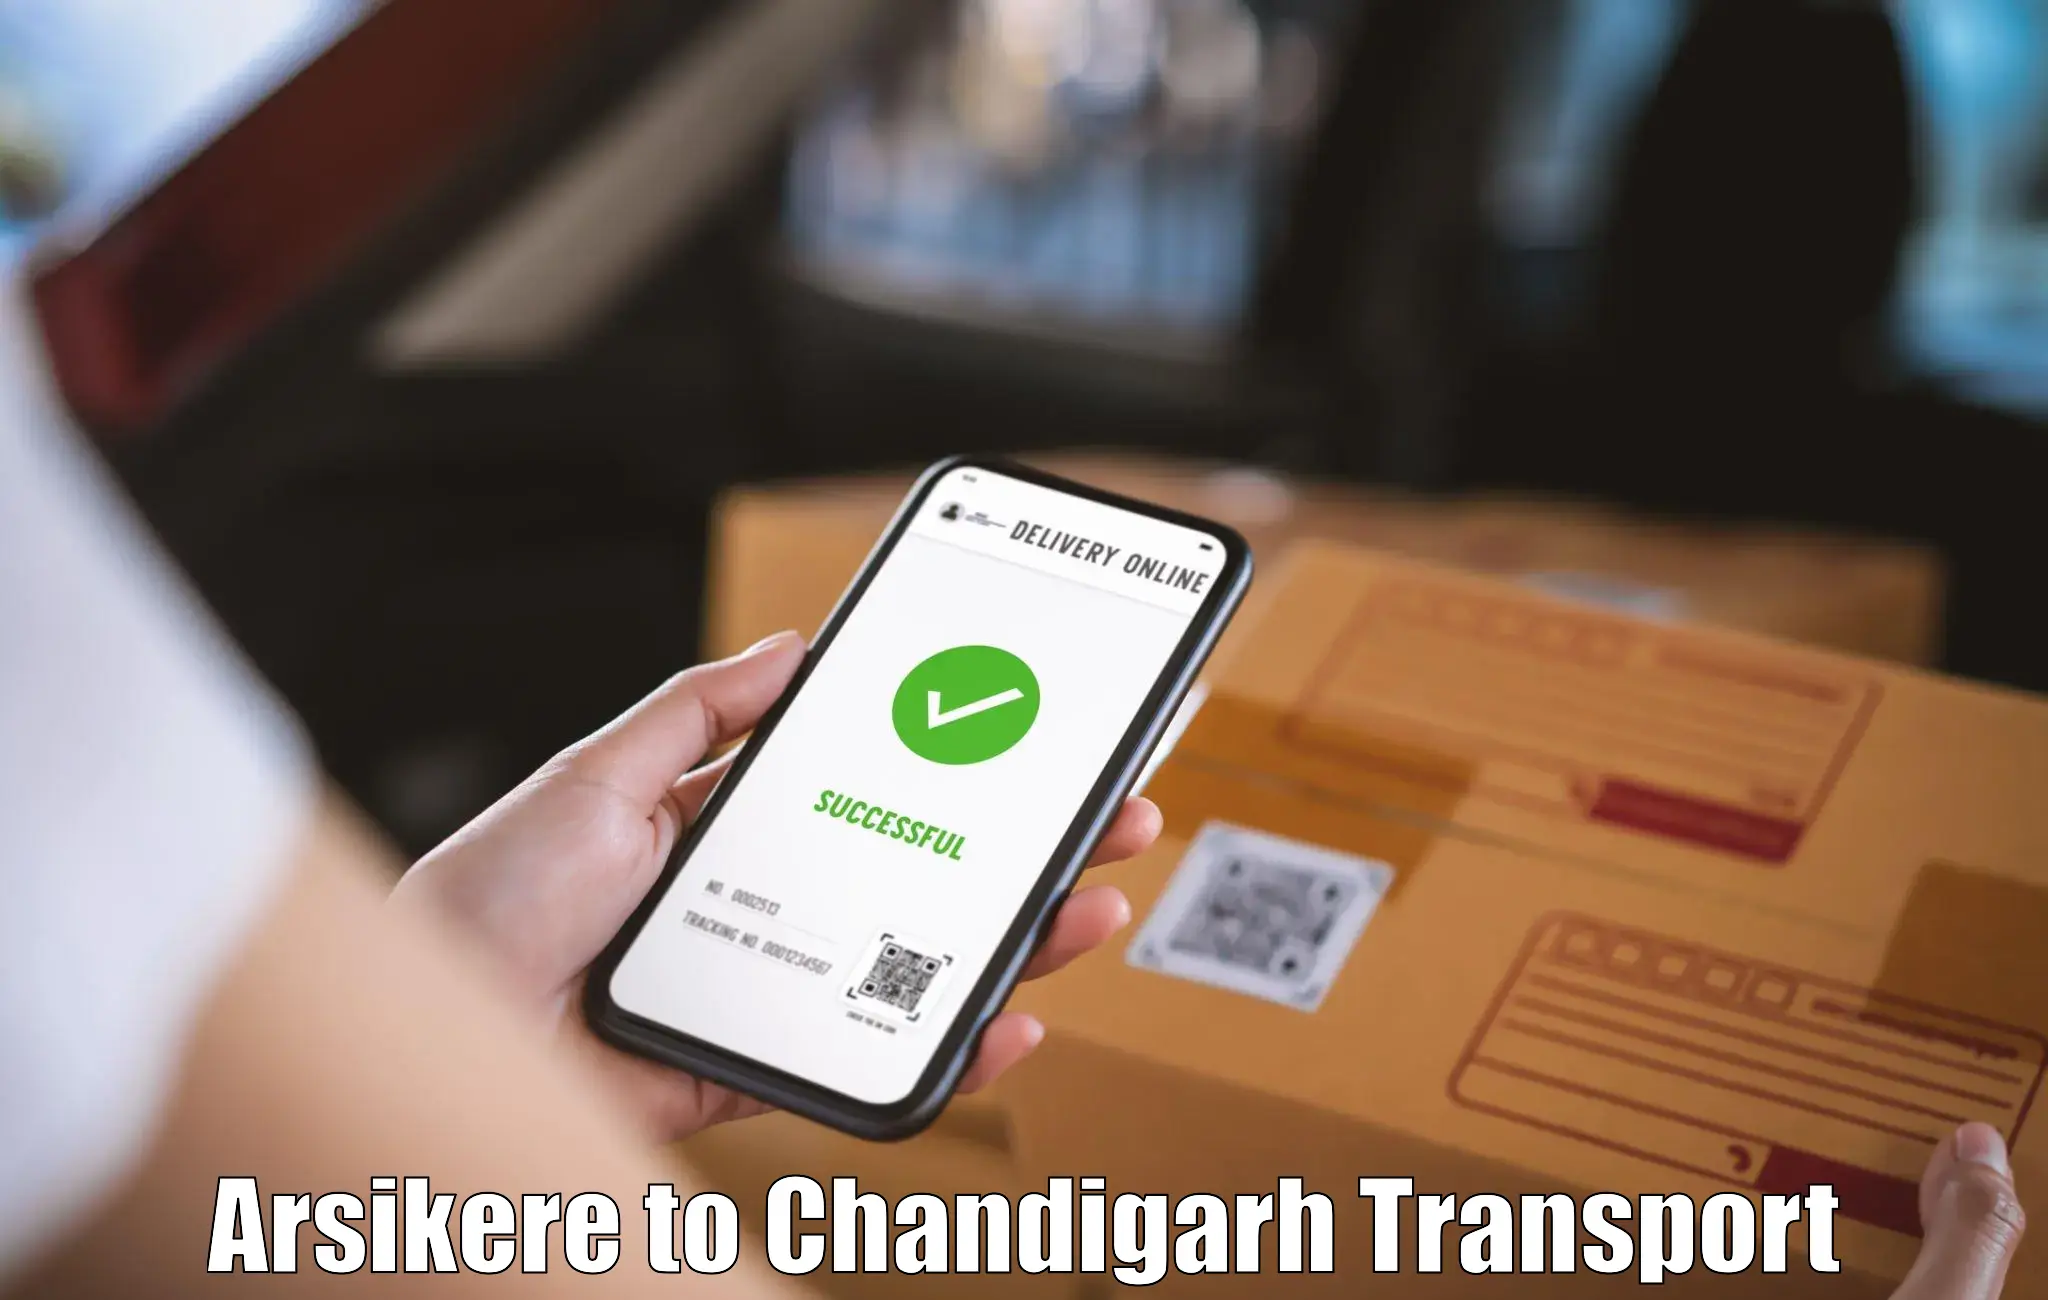 Cargo transportation services Arsikere to Chandigarh